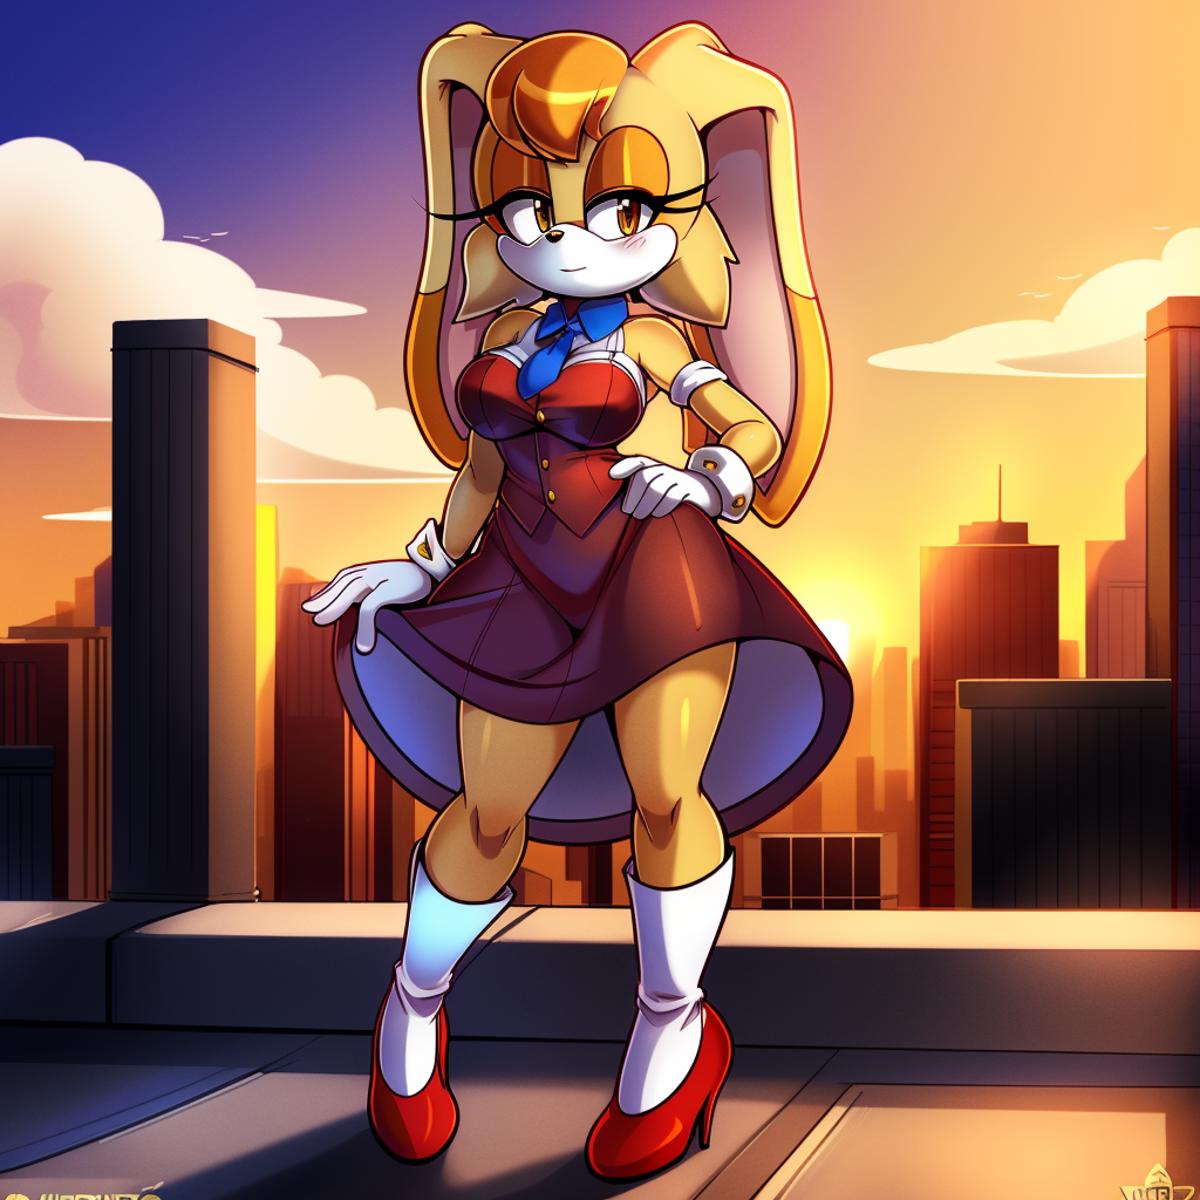 Vanilla The Rabbit image by Aigenerater